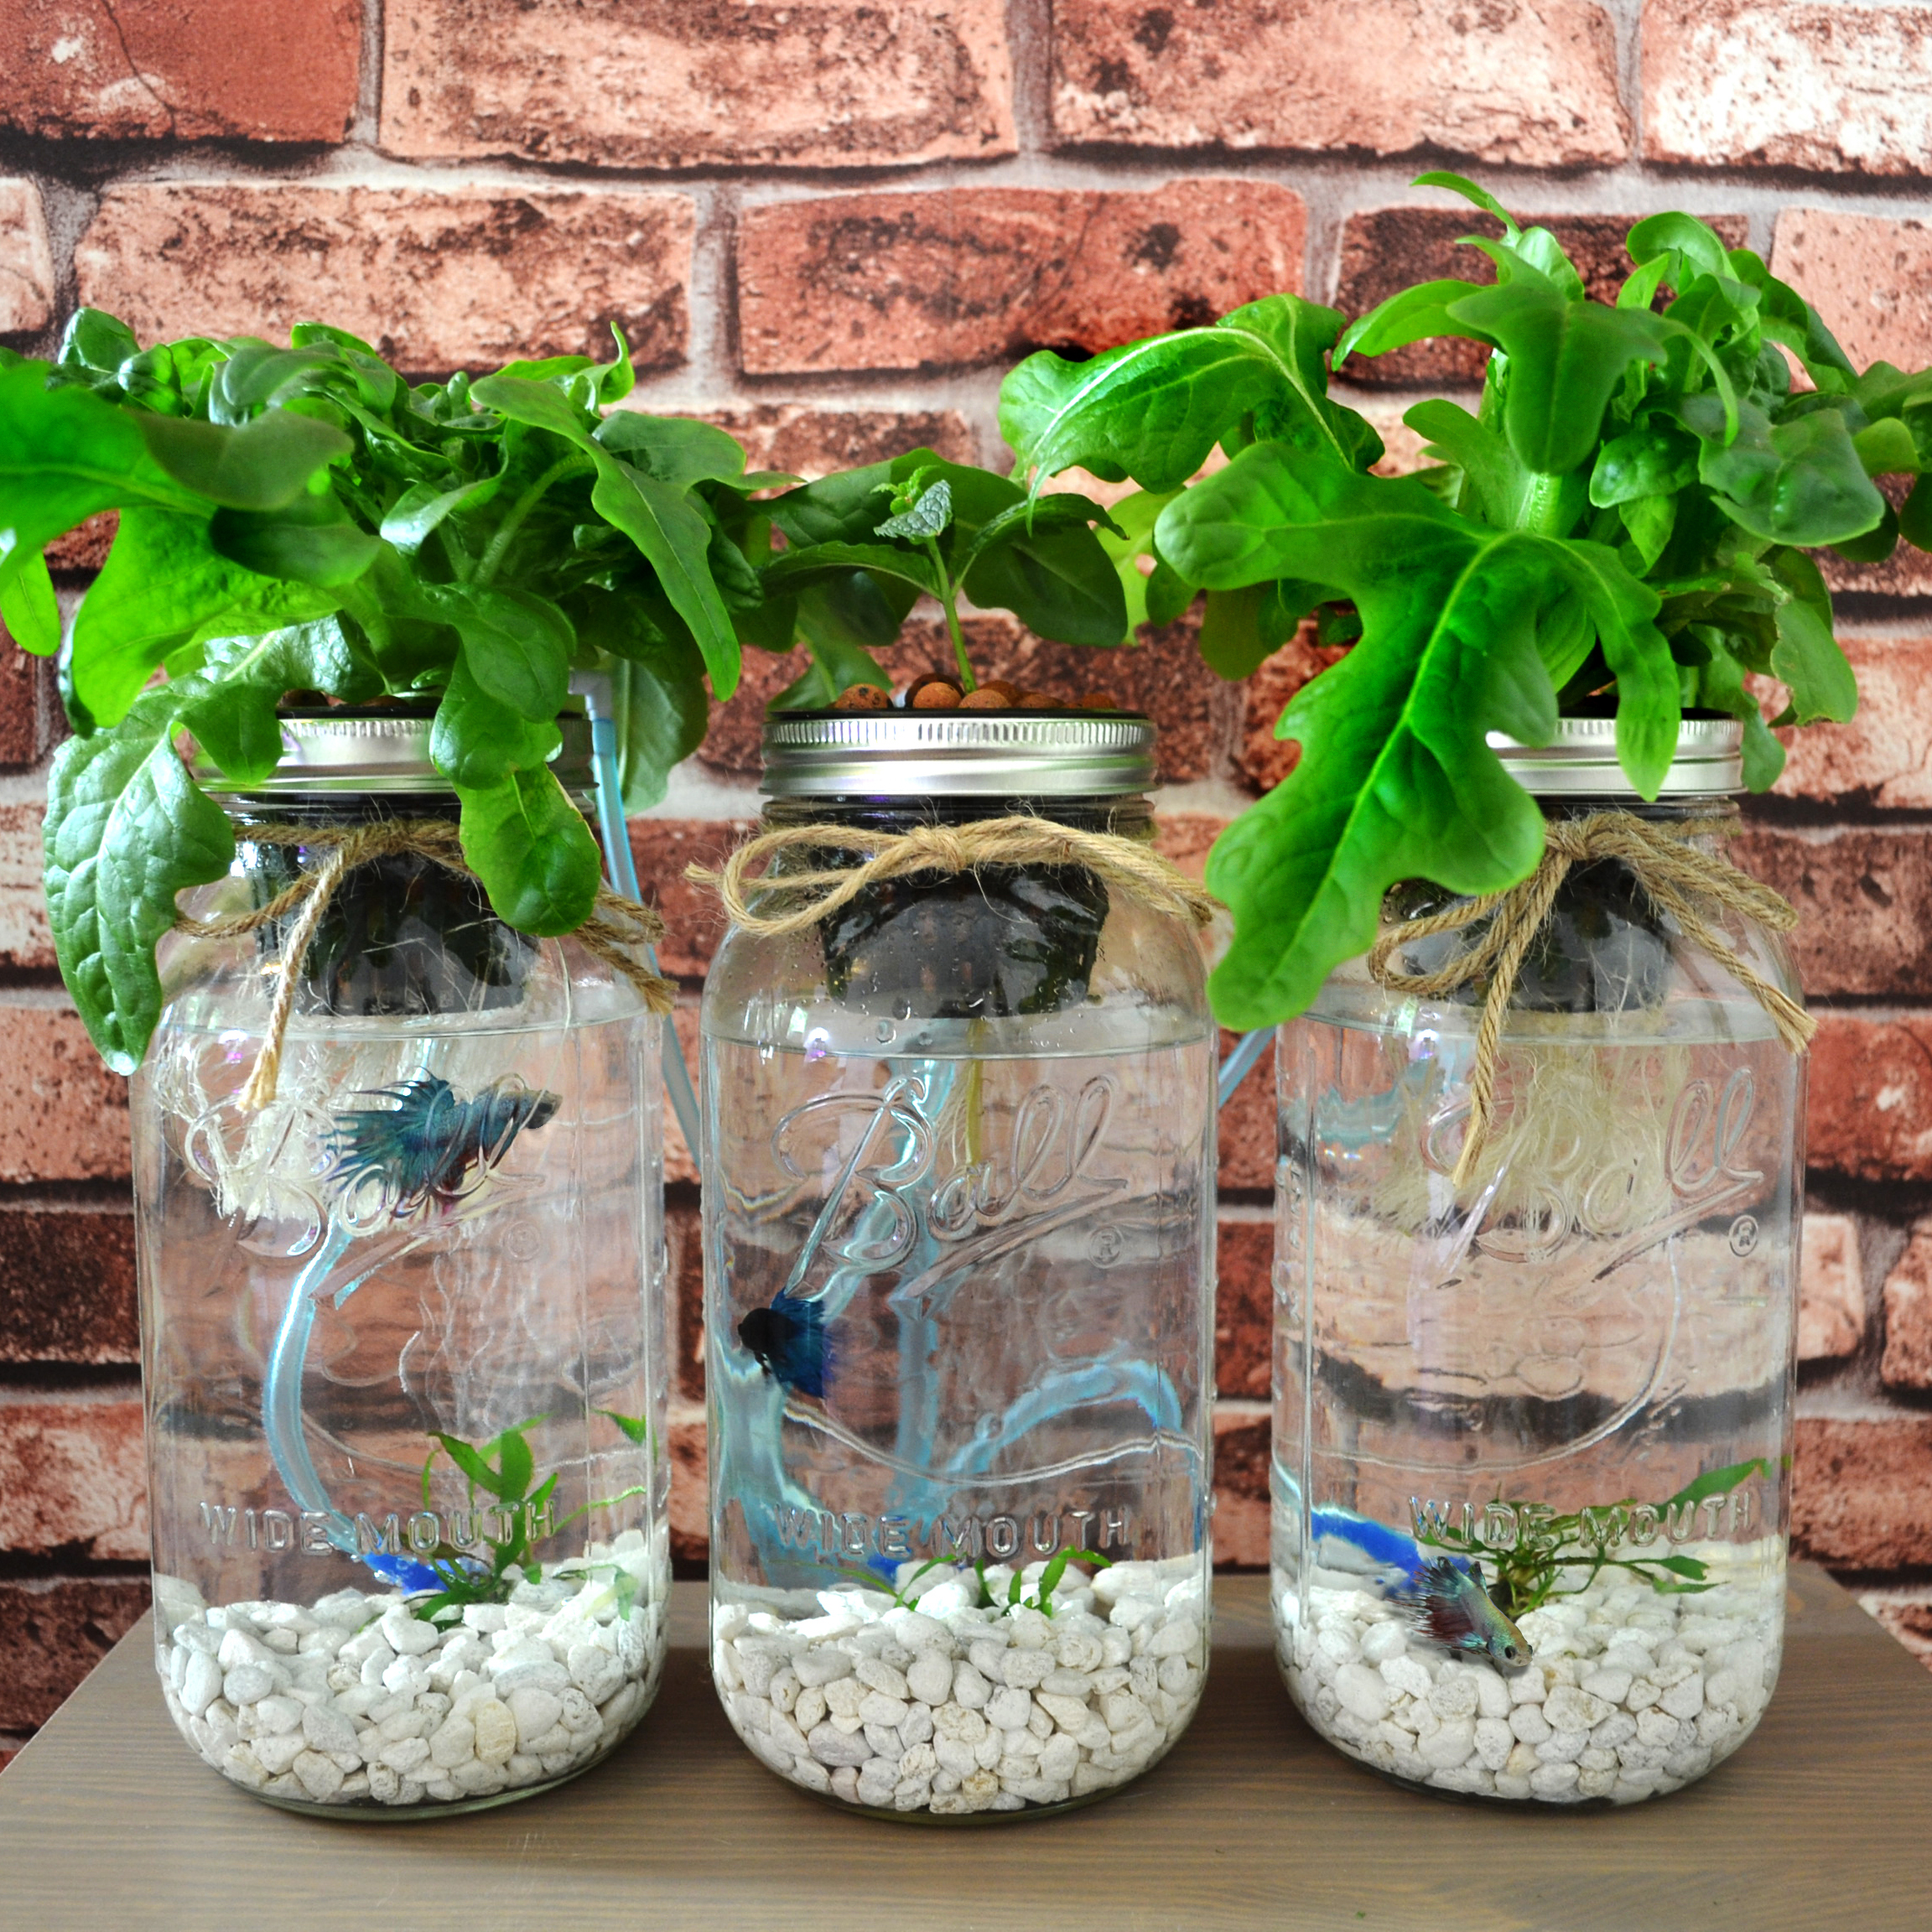 small-scale aquaponics pruning: more room for fish and